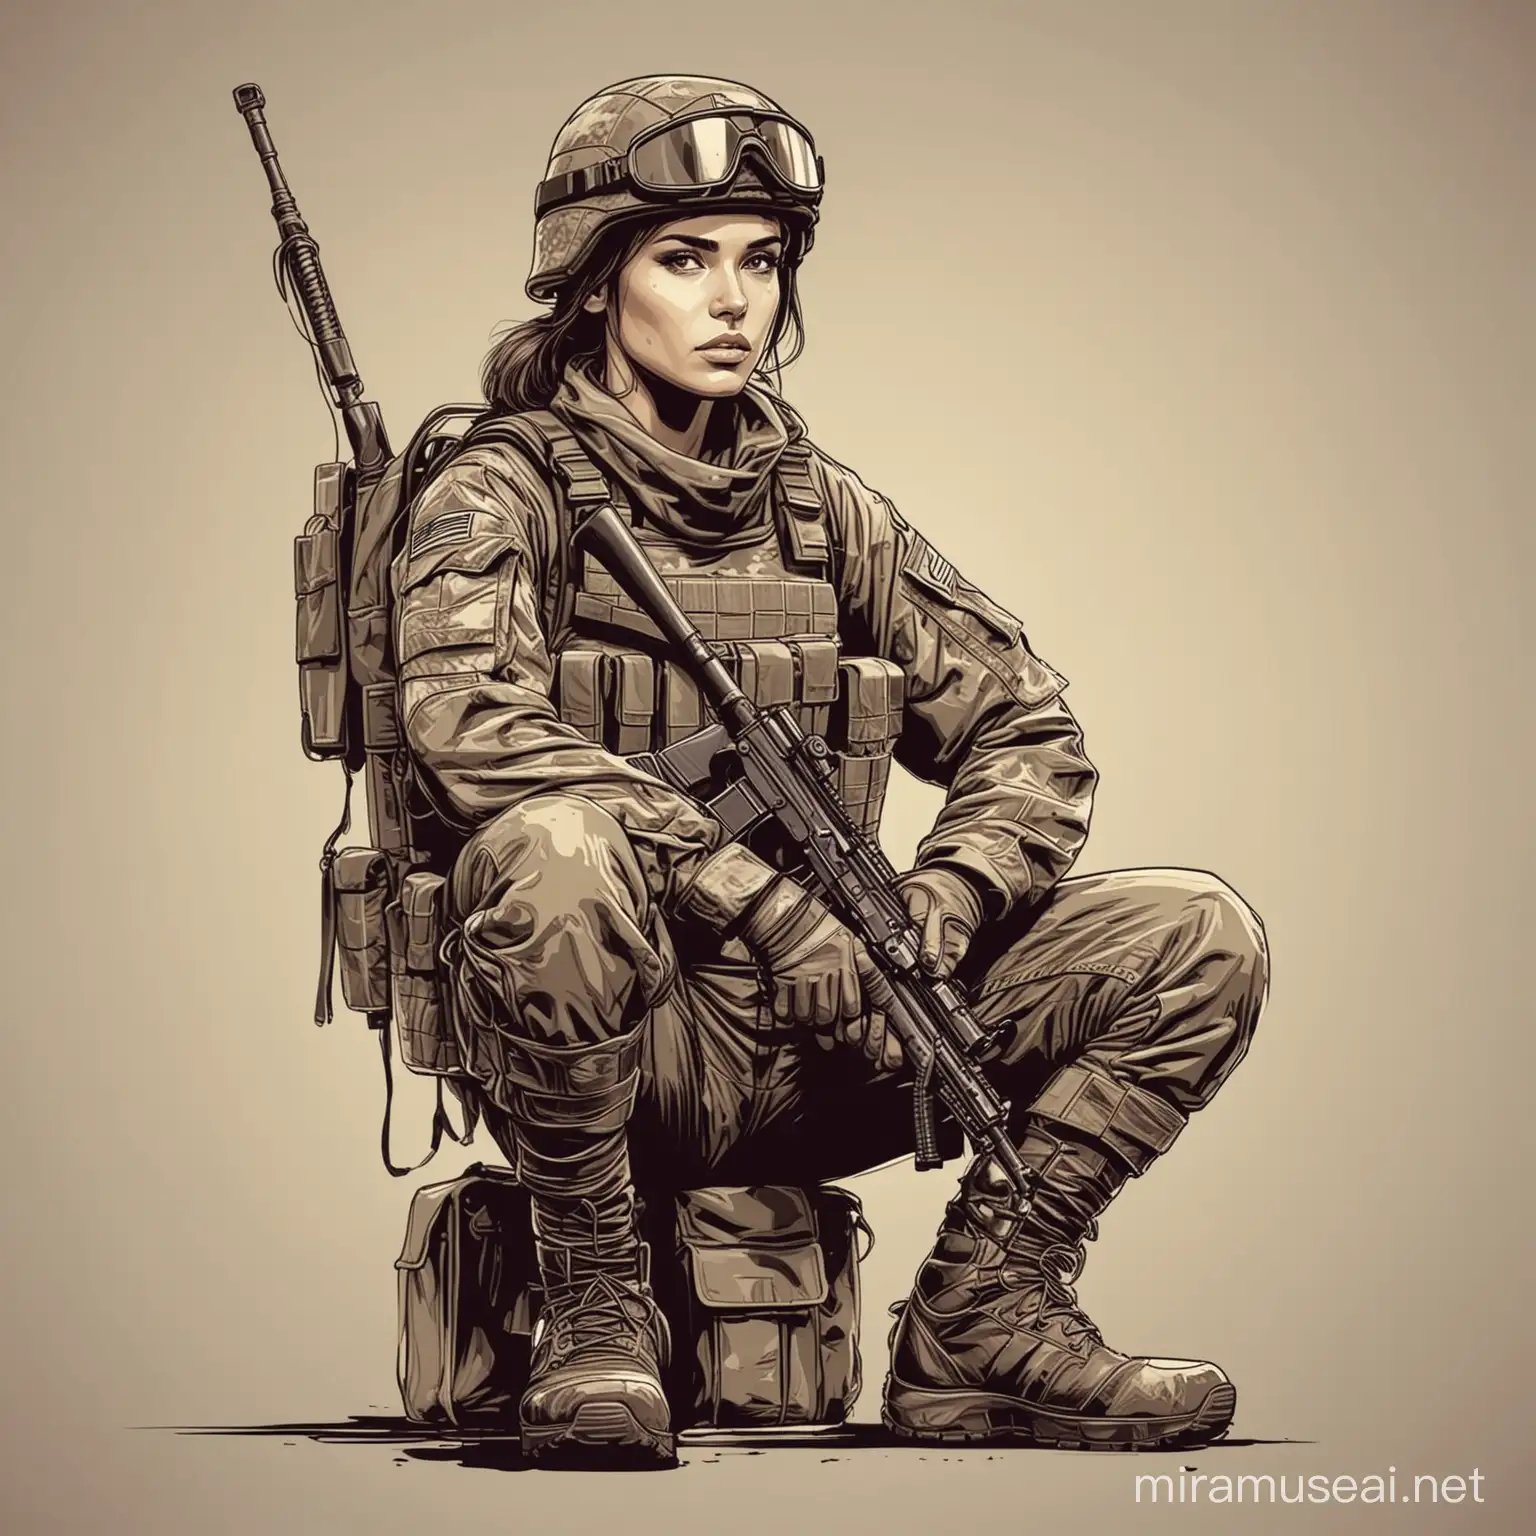 Graphic Style Soldier Woman Sitting with Weapon